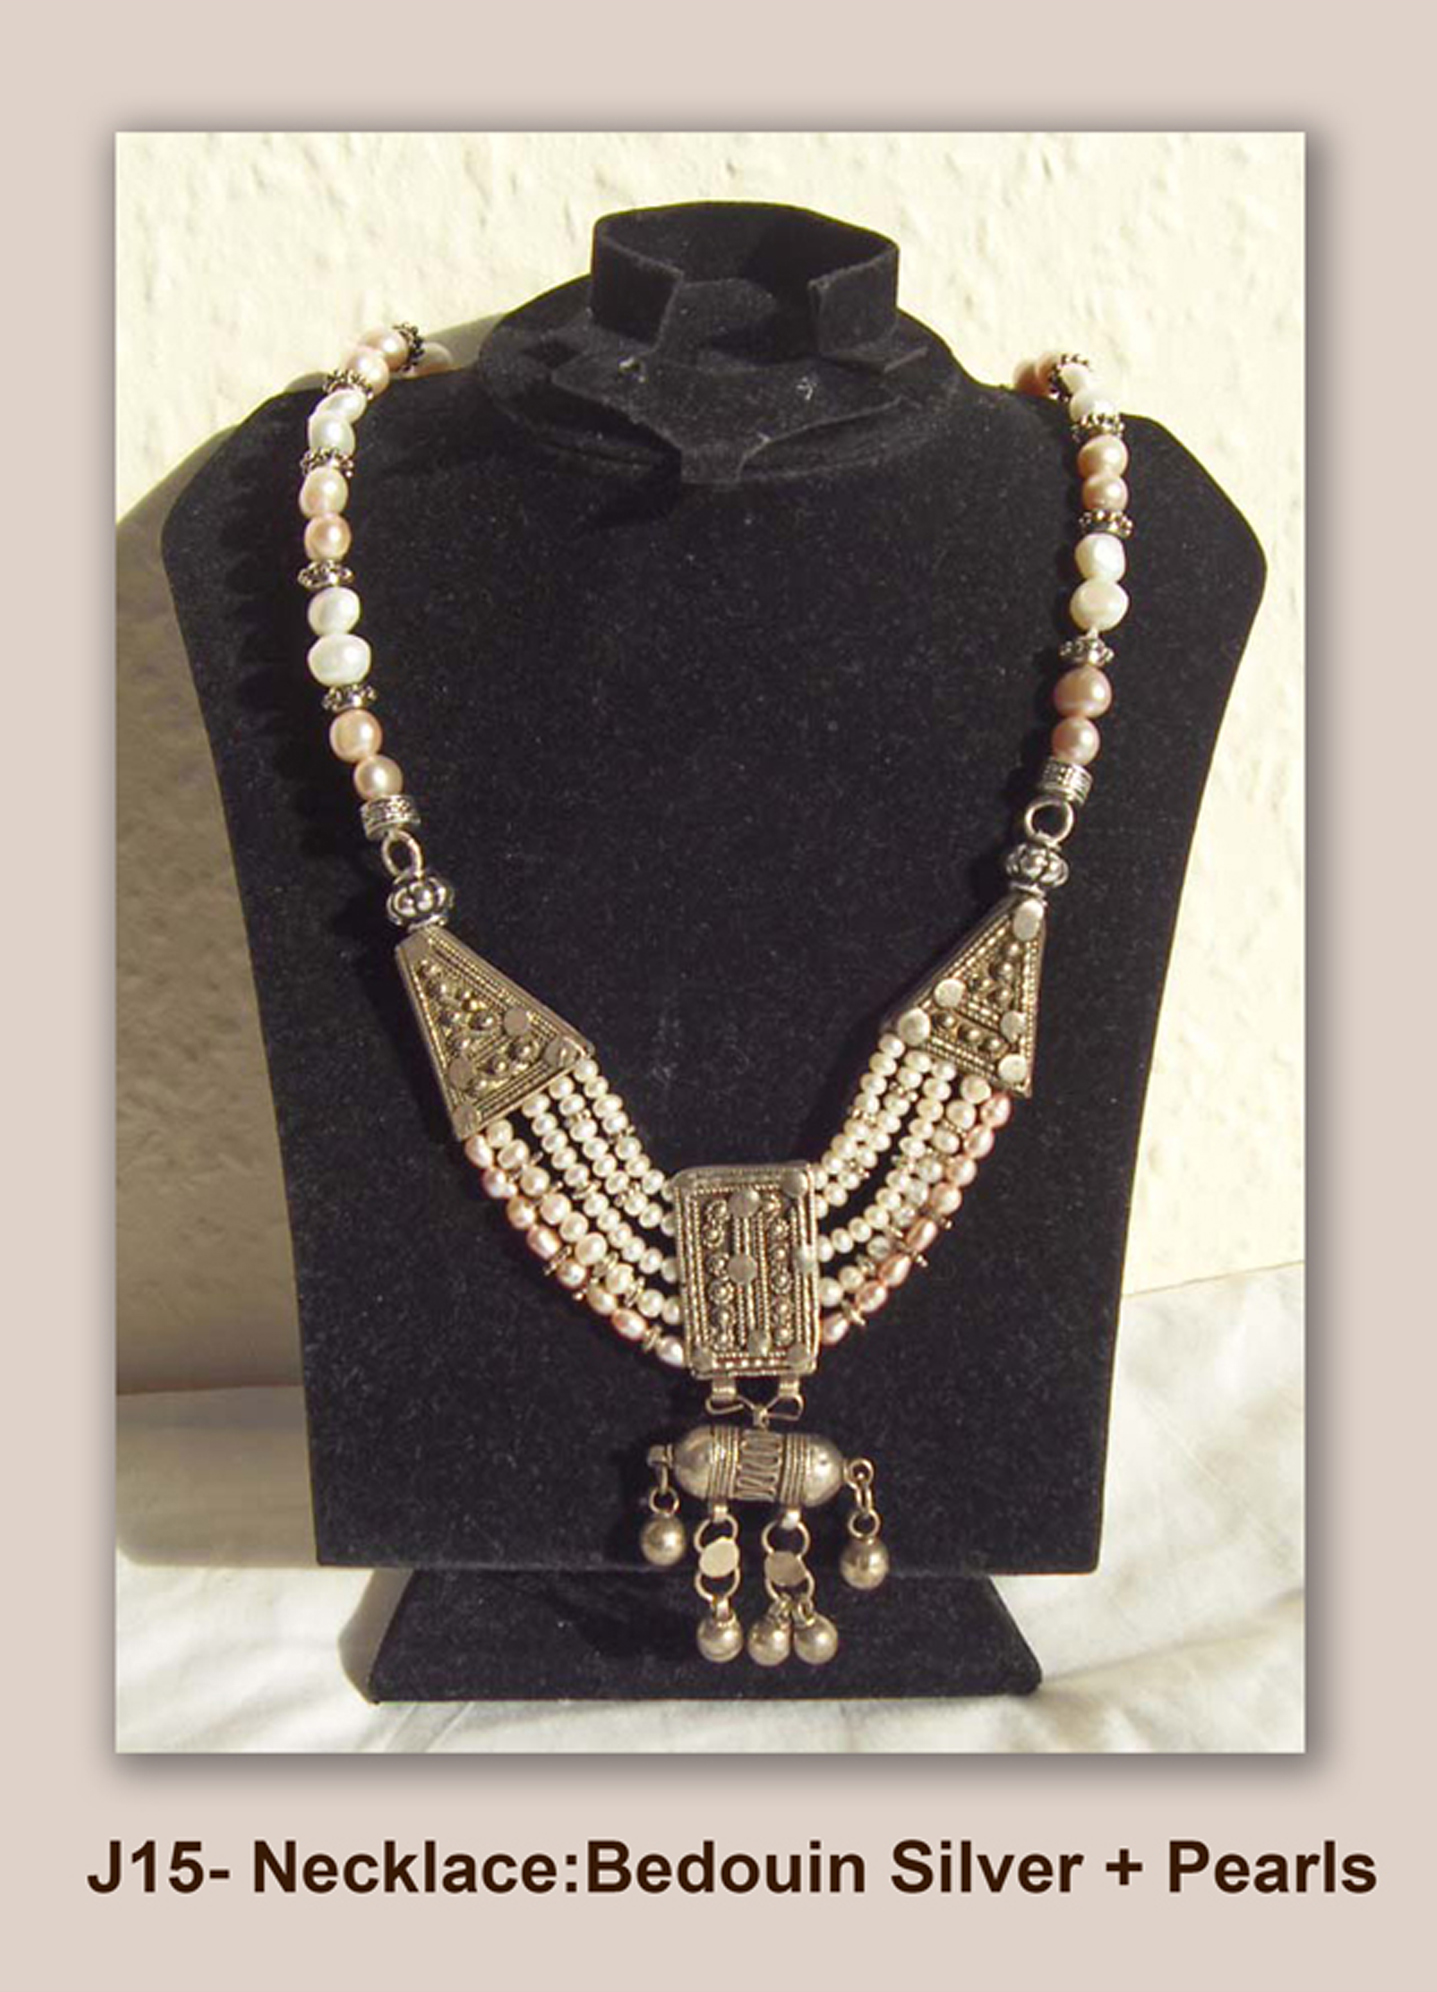 Bedouin silver necklace with pearls